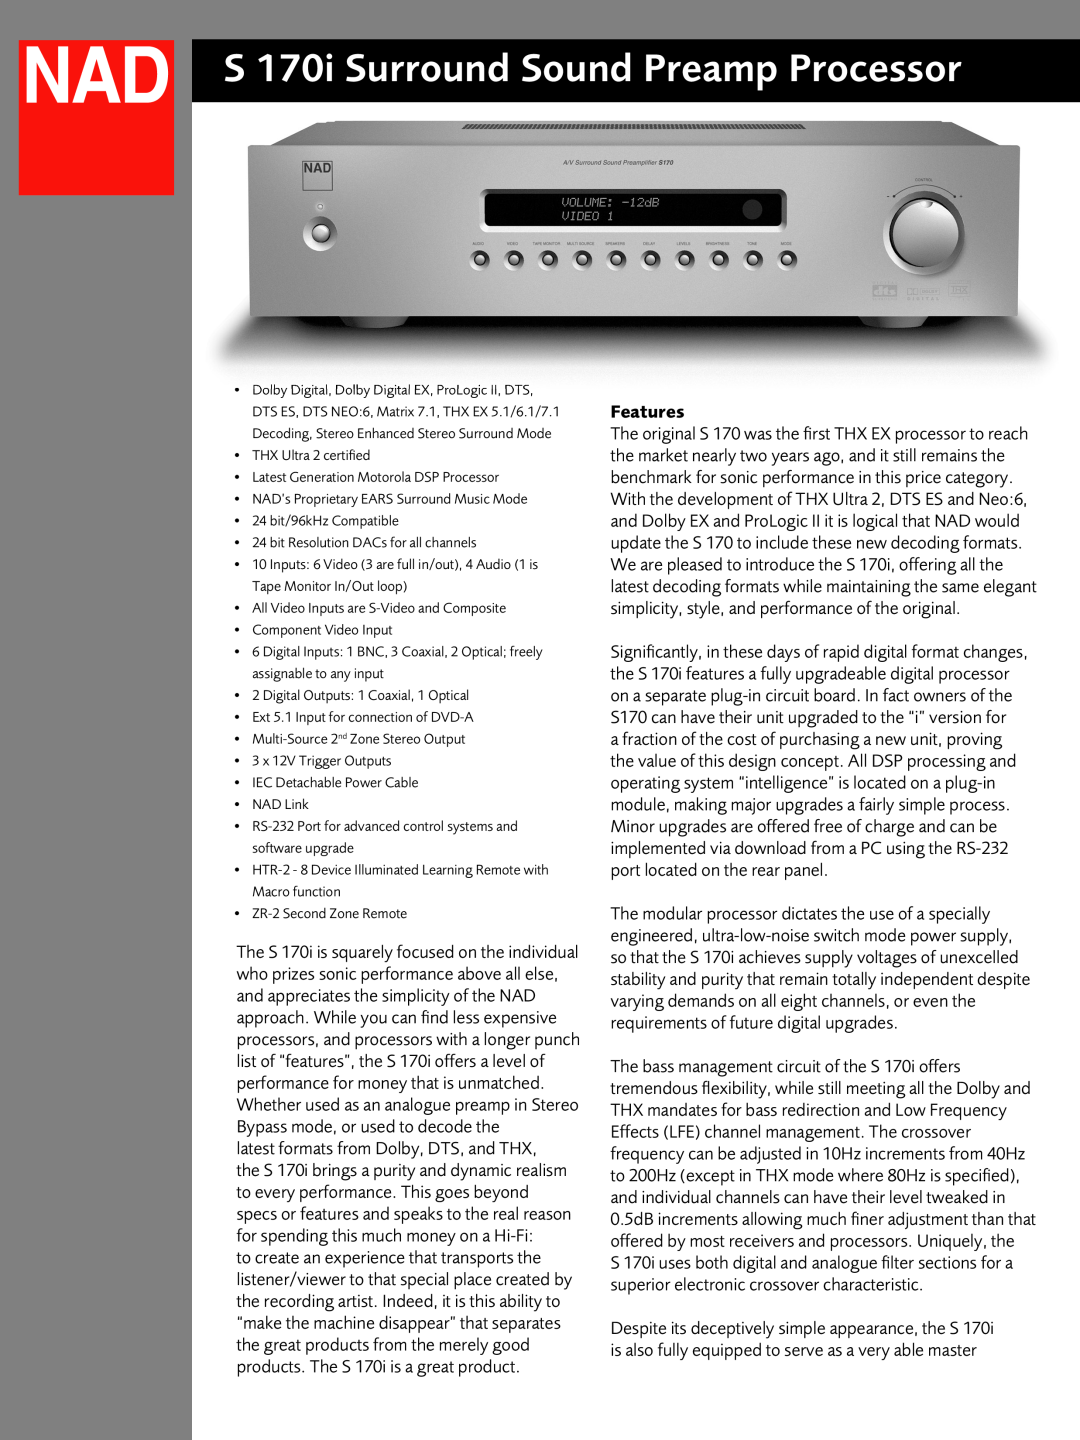 NAD manual Features, S 170i Surround Sound Preamp Processor 